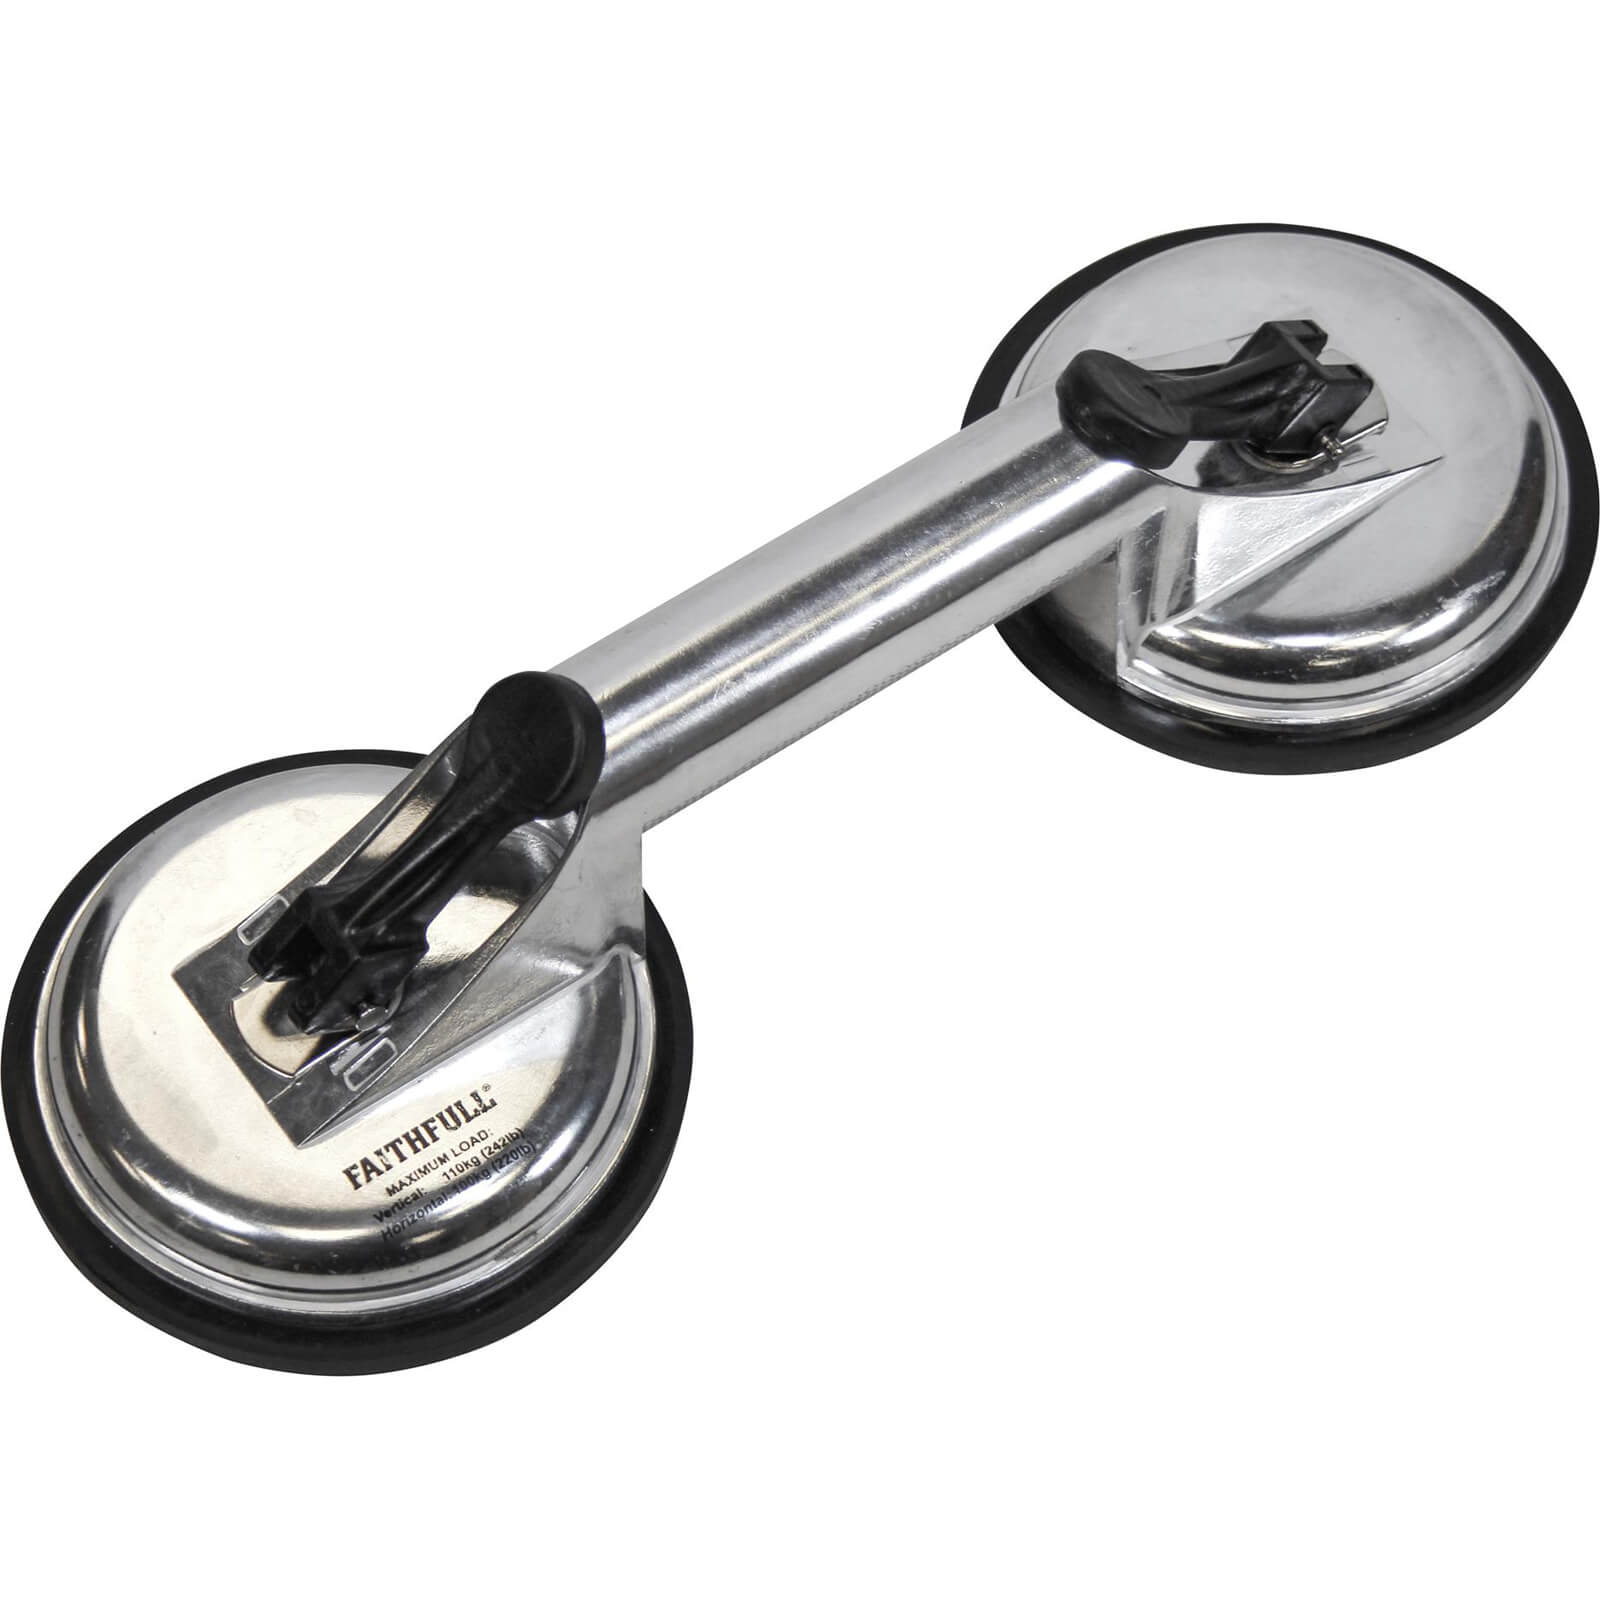 Image of Faithfull Professional Suction Cup Lifter Double